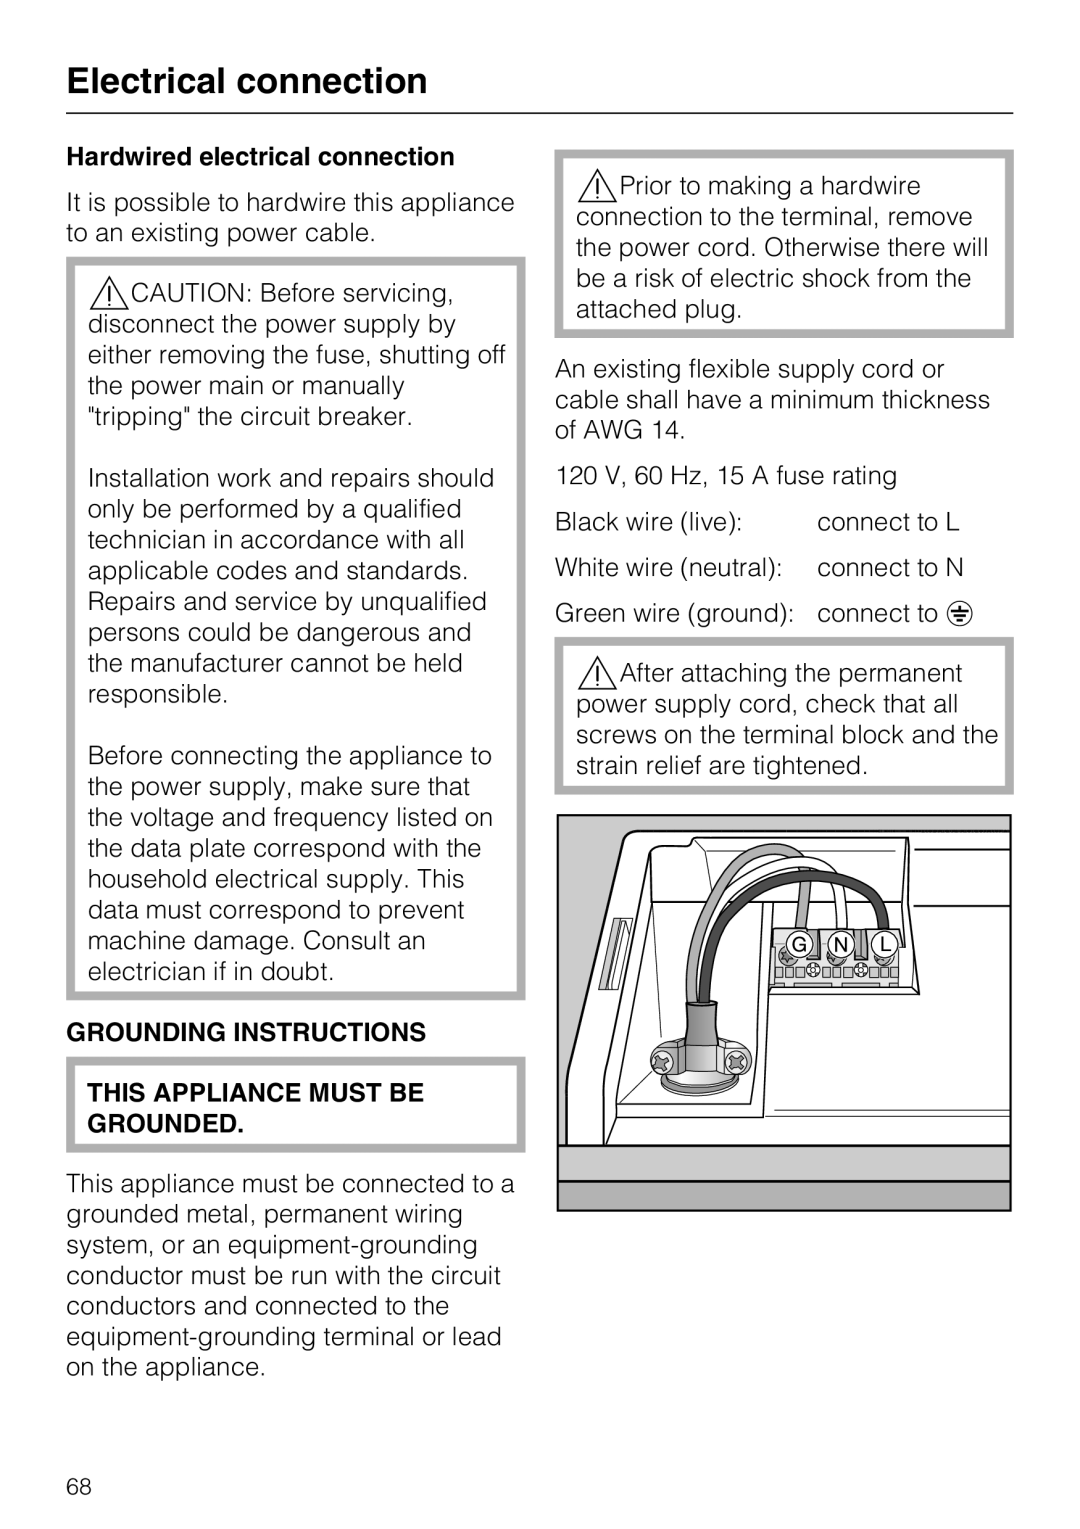 Miele G 5570, G 5575 manual Electrical connection, Hardwired electrical connection, Grounding Instructions 